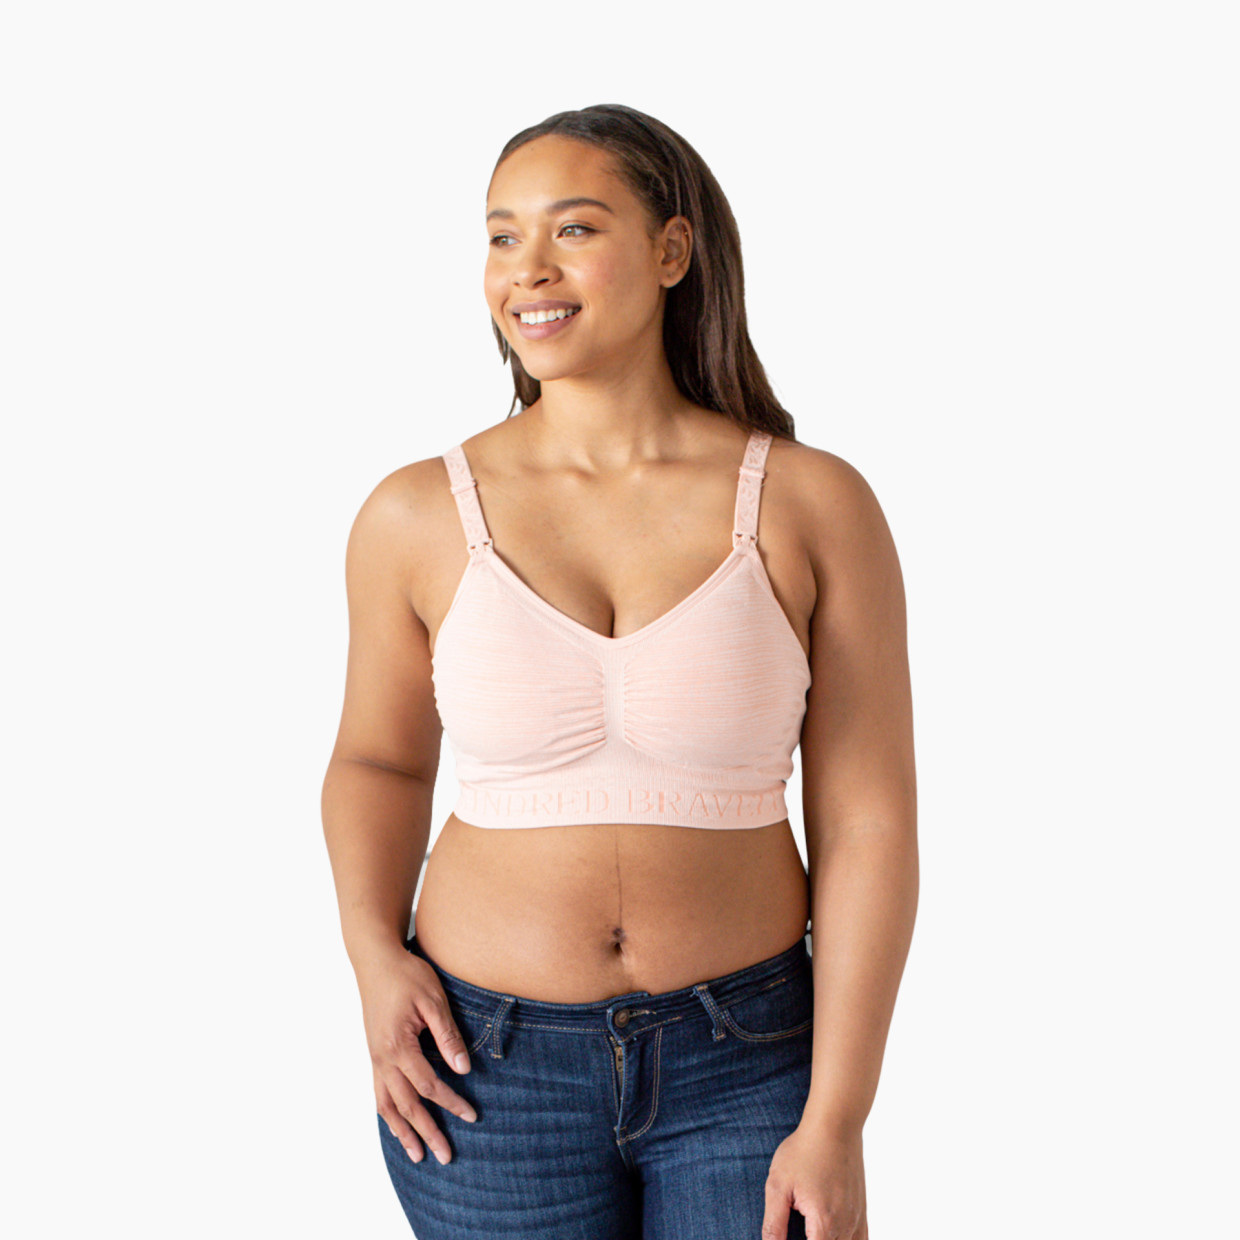 Kindred Bravely Sublime Hands Free Pumping Bra - Pink Heather, Small